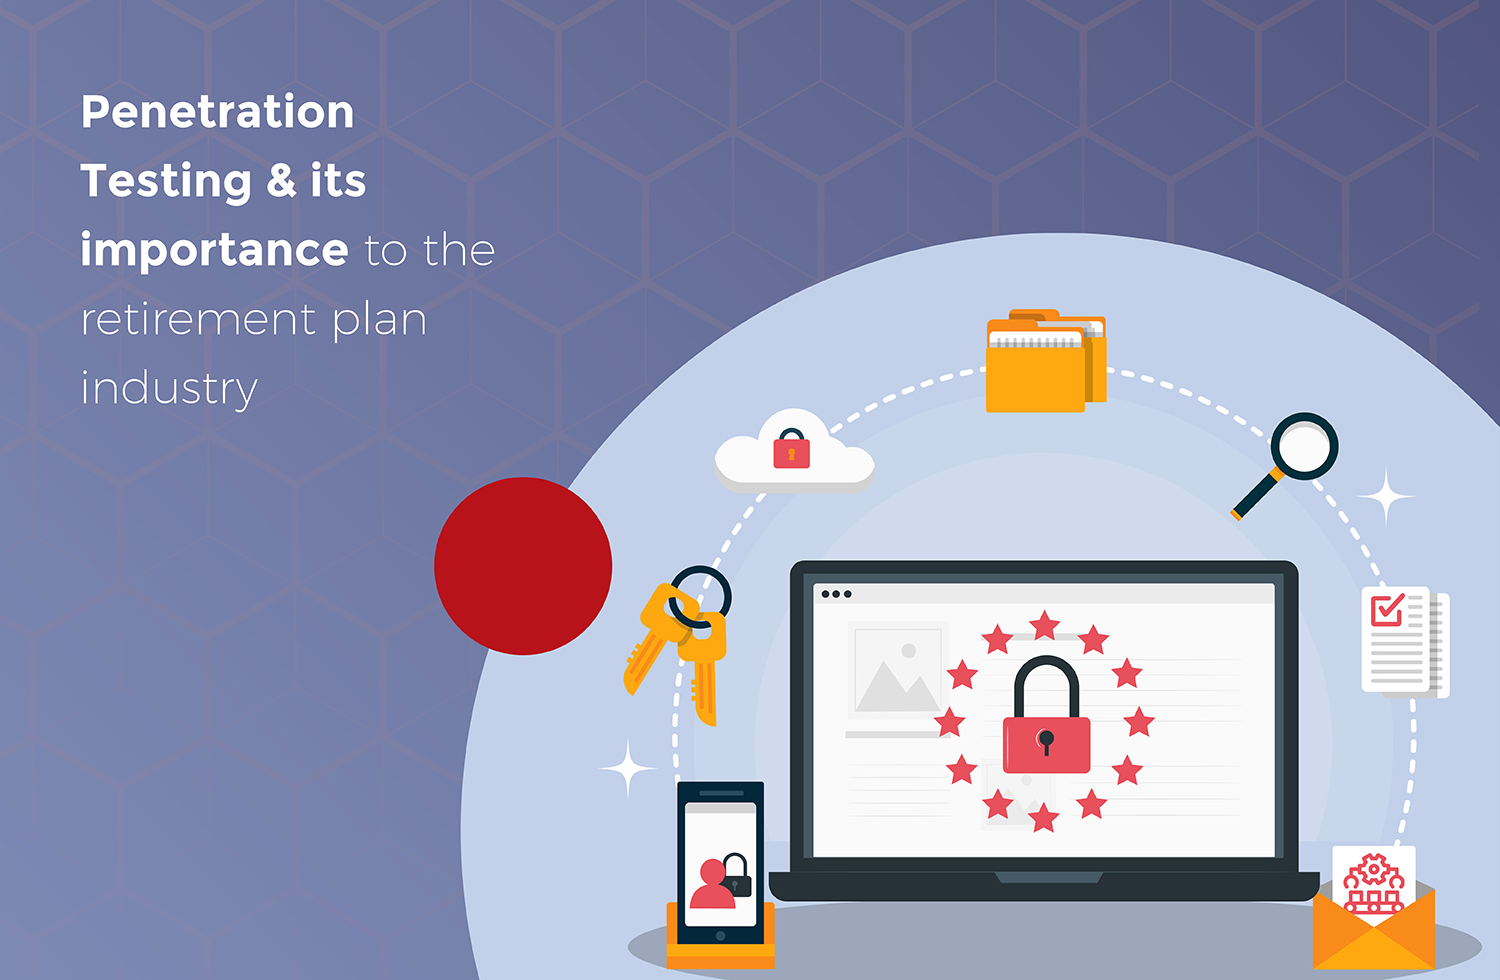 Penetration Testing & Its importance in the Retirement Plan industry   